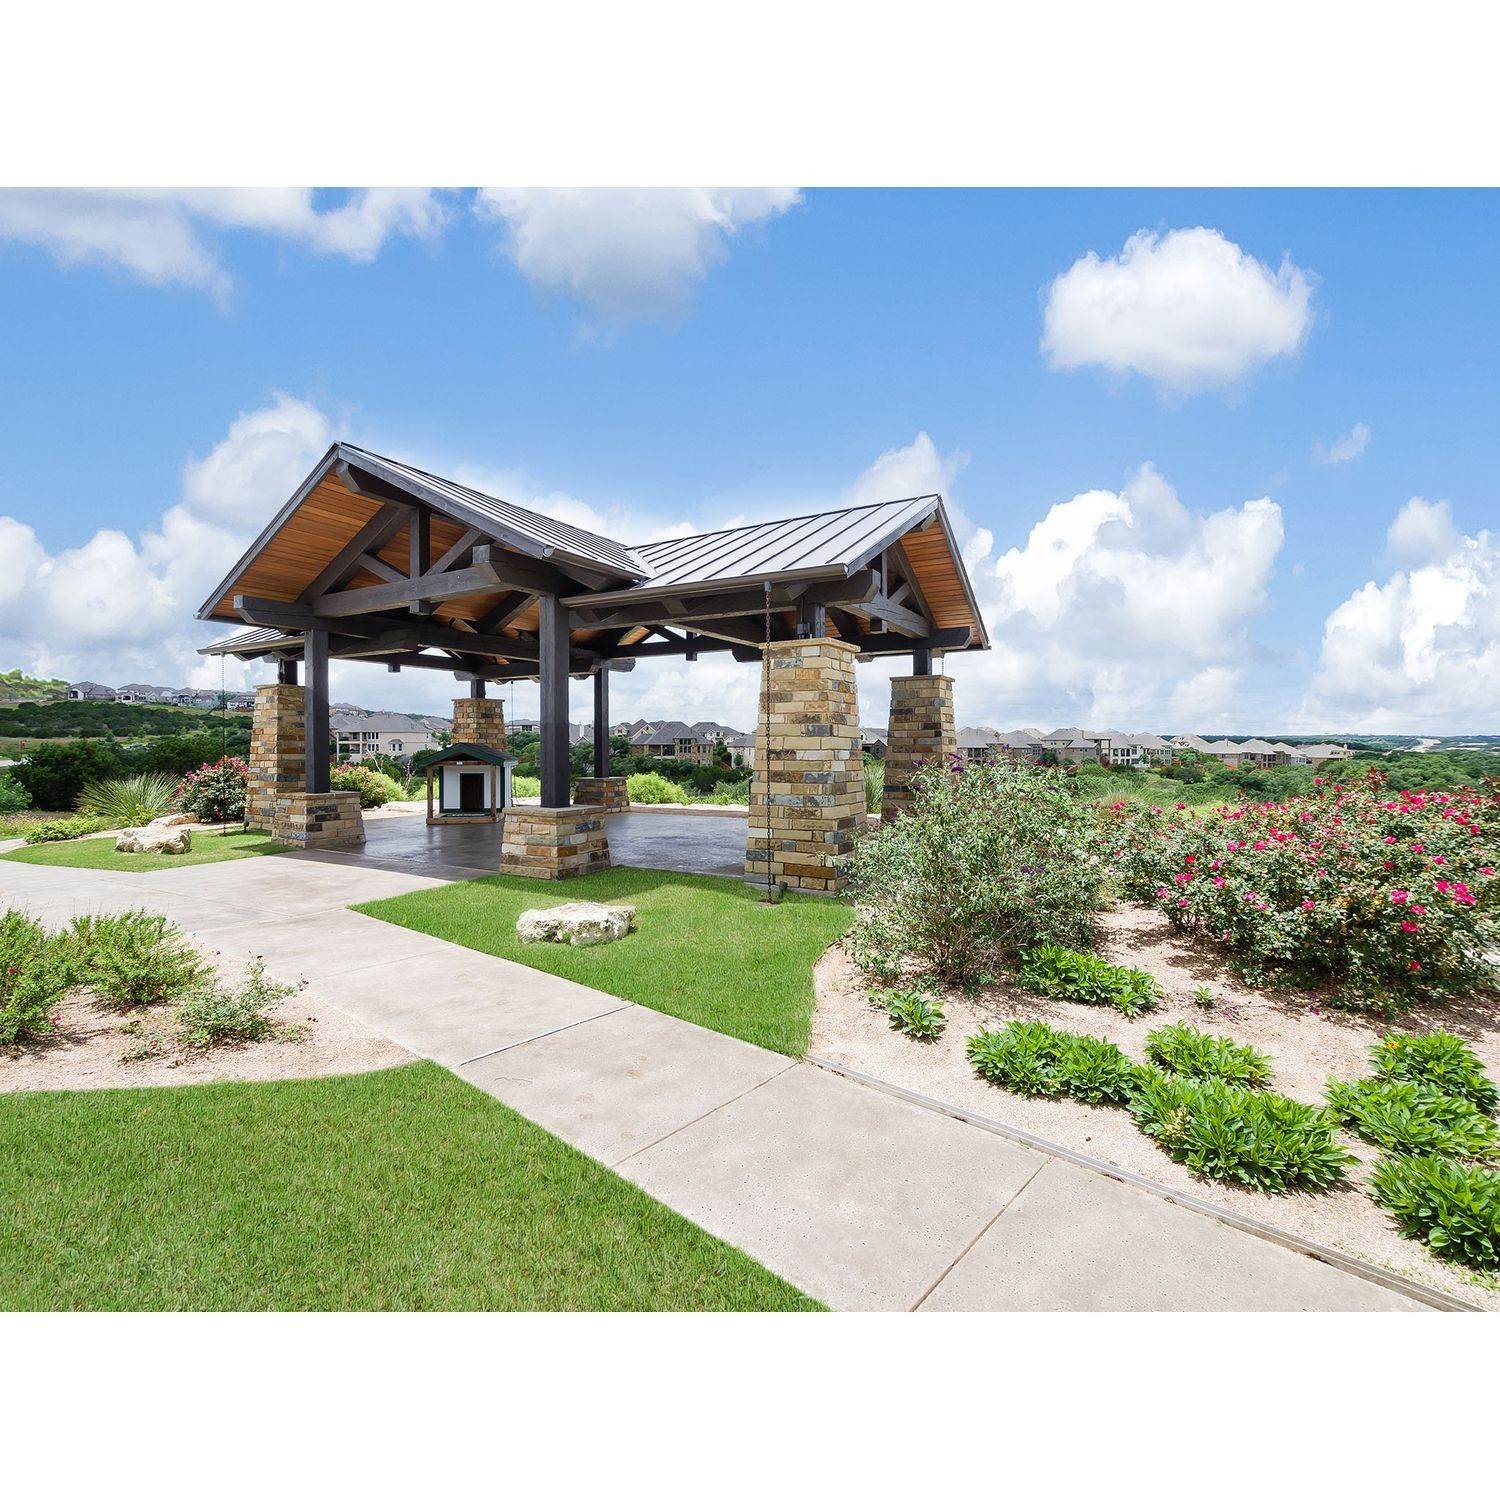 8. Sweetwater 60'建於 6208 Bower Well Road, Austin, TX 78738